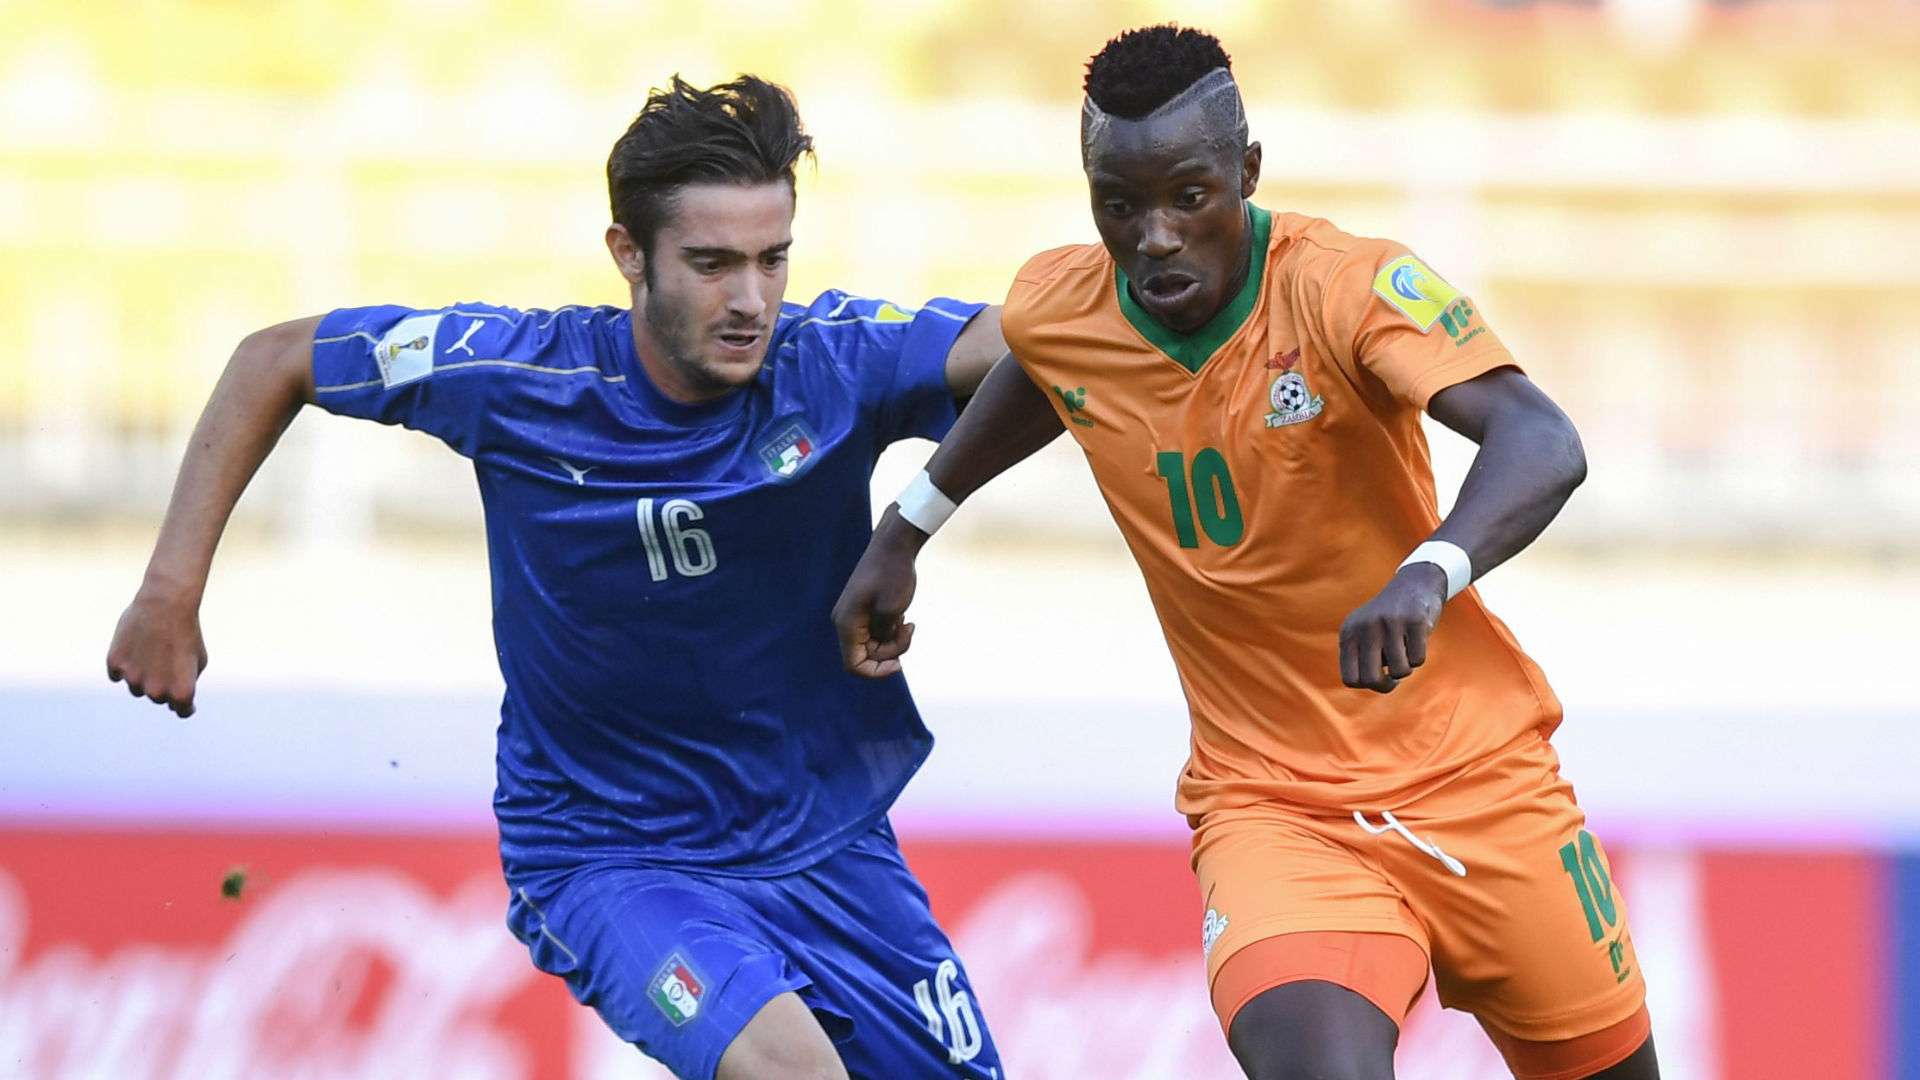 Italy Zambia Under-20 World Cup